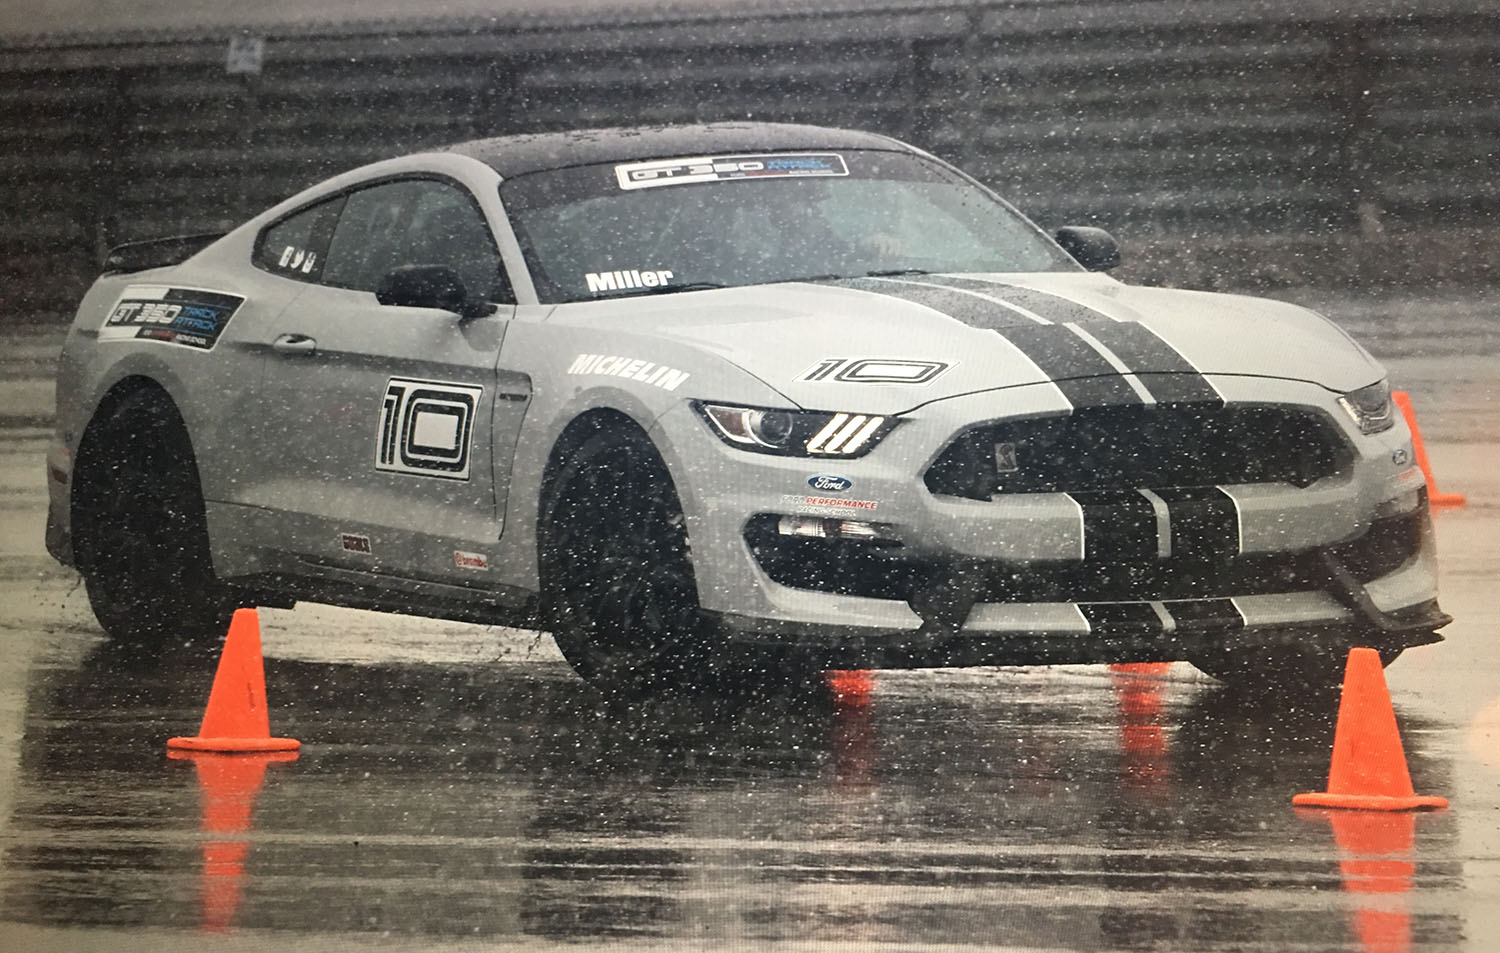 Car driving on track in snow and sleet